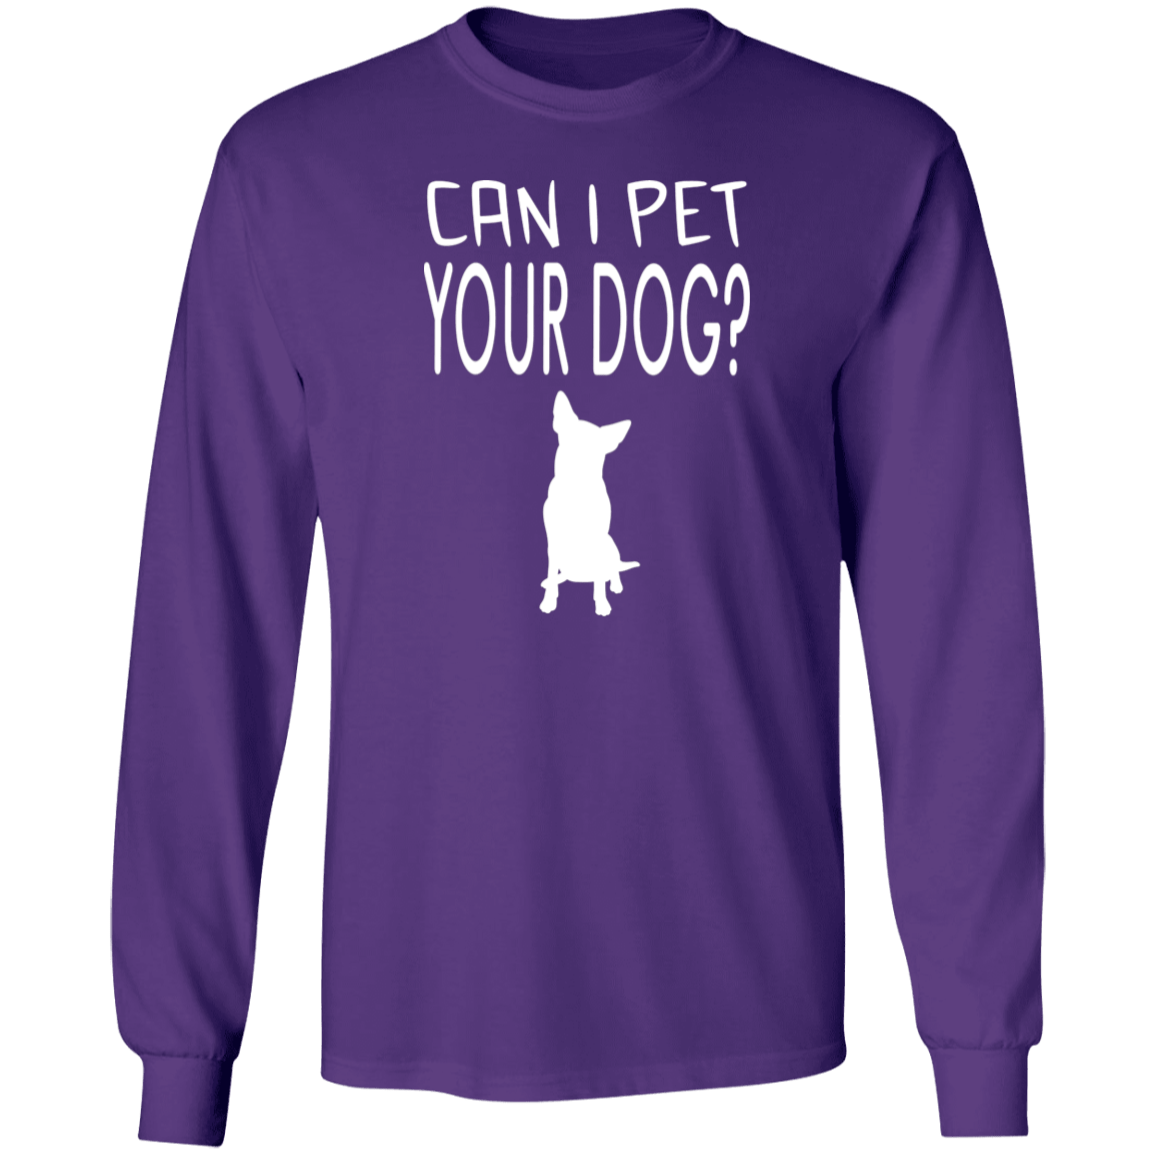 Can I Pet Your Dog - Long Sleeve T Shirt.